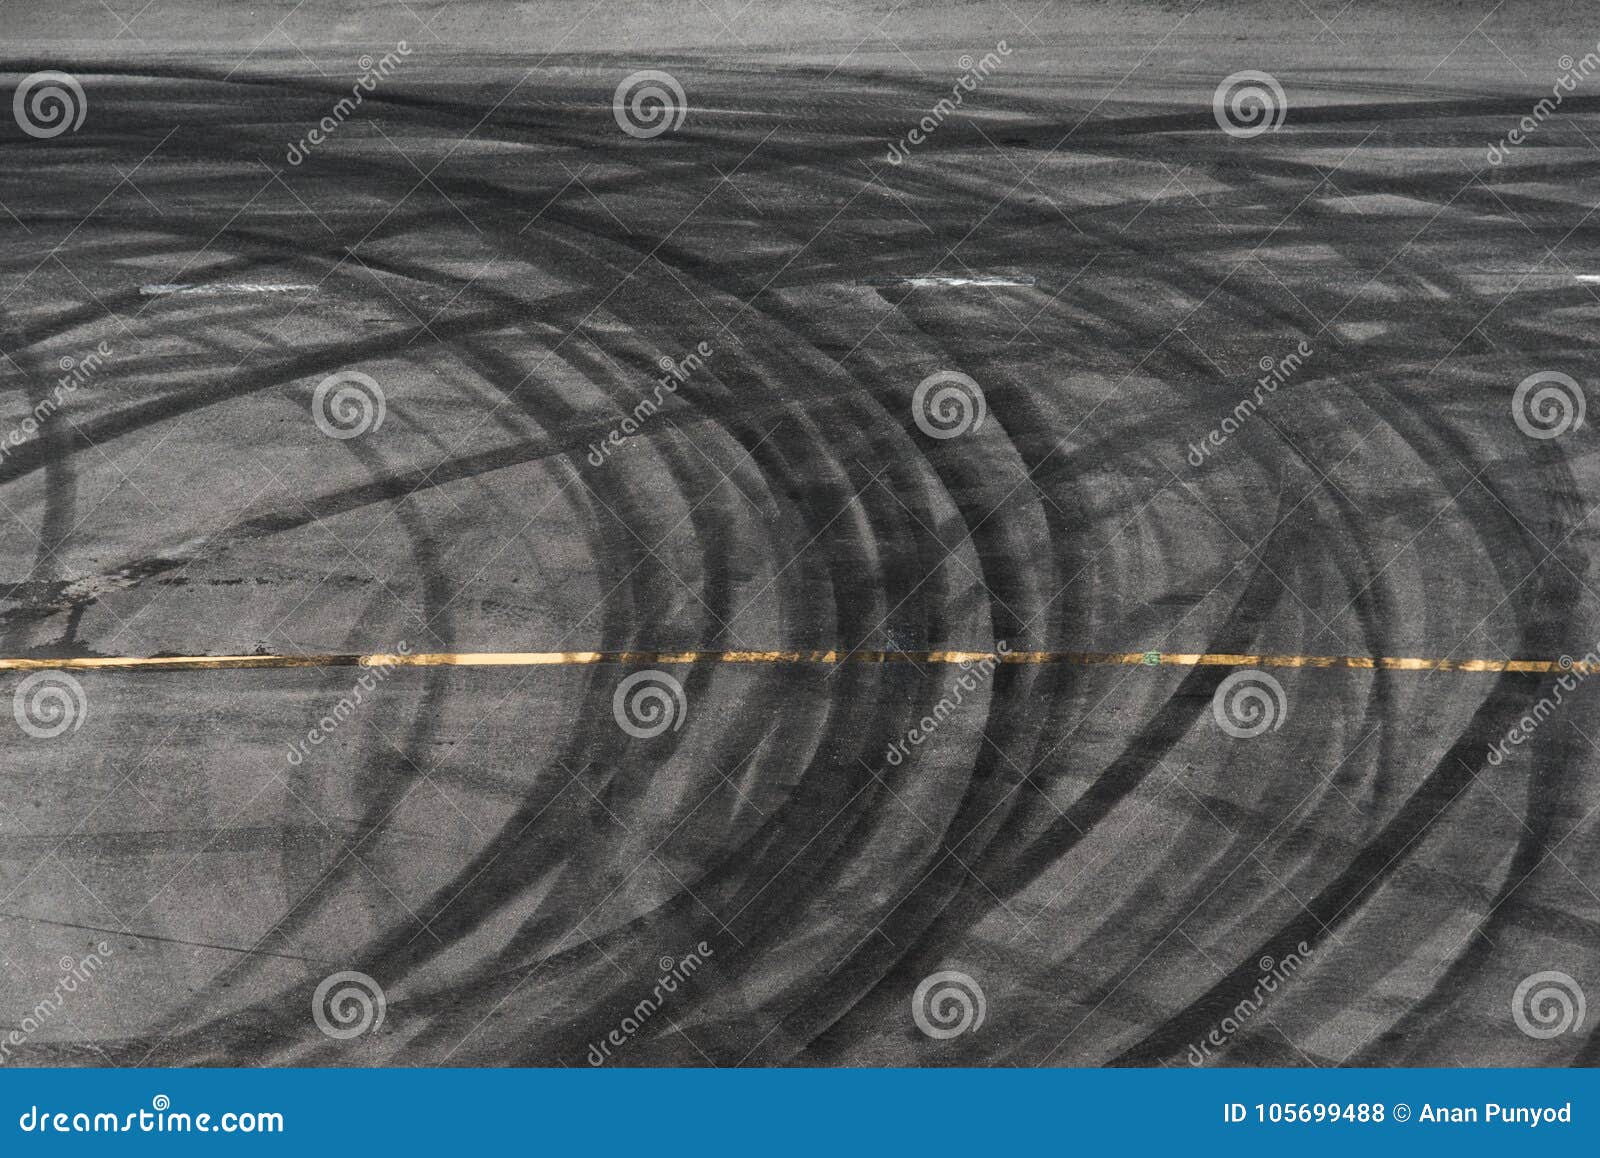 abstract of black tire wheels caused by drift car on the road